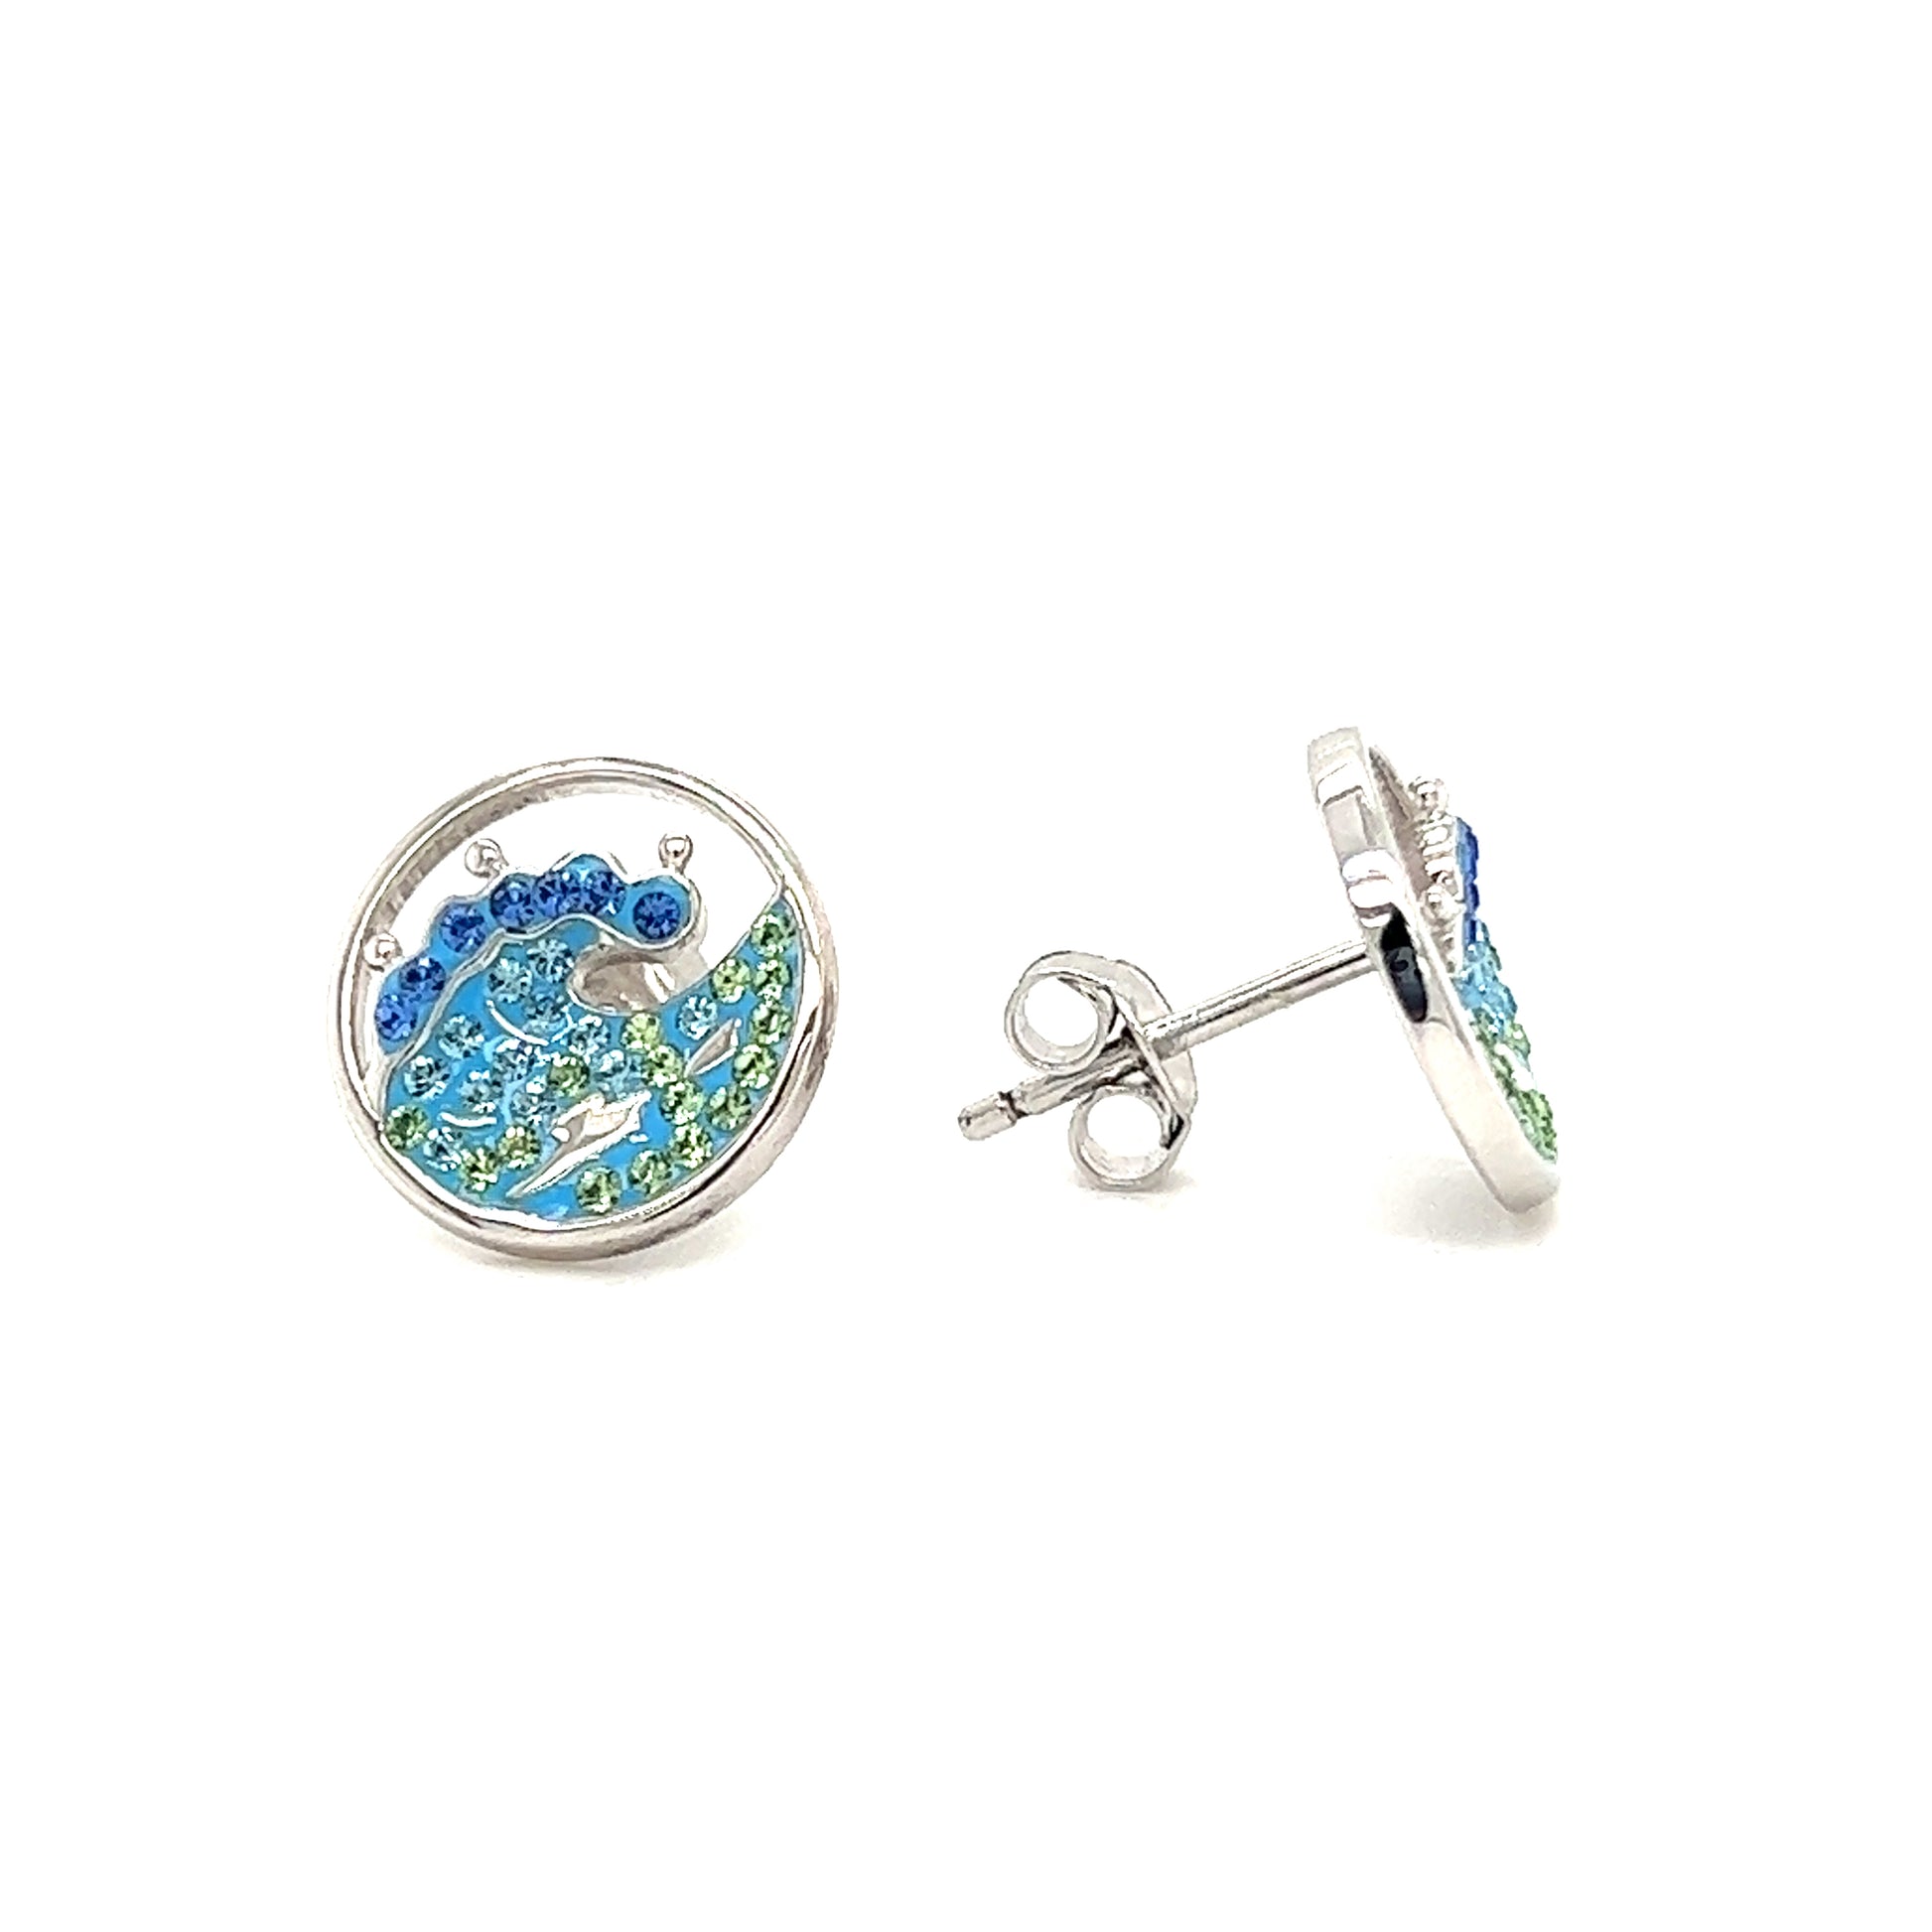 Wave Stud Earrings with Blue, Aqua and Green Crystals in Sterling Silver. Front and Side View